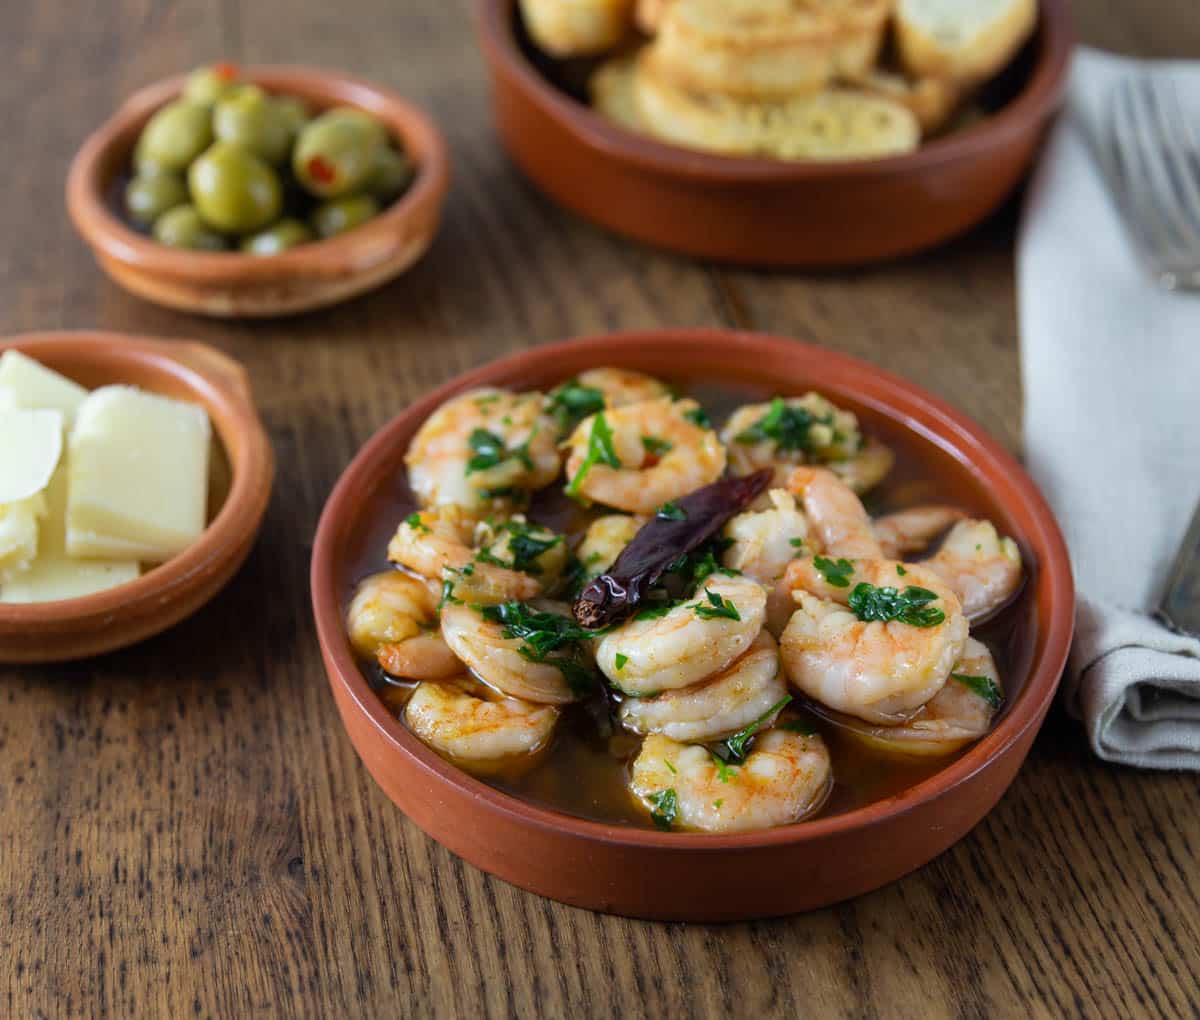 A photo of gambas al ajillio or shrimp in garlic sauce with bread in the background.